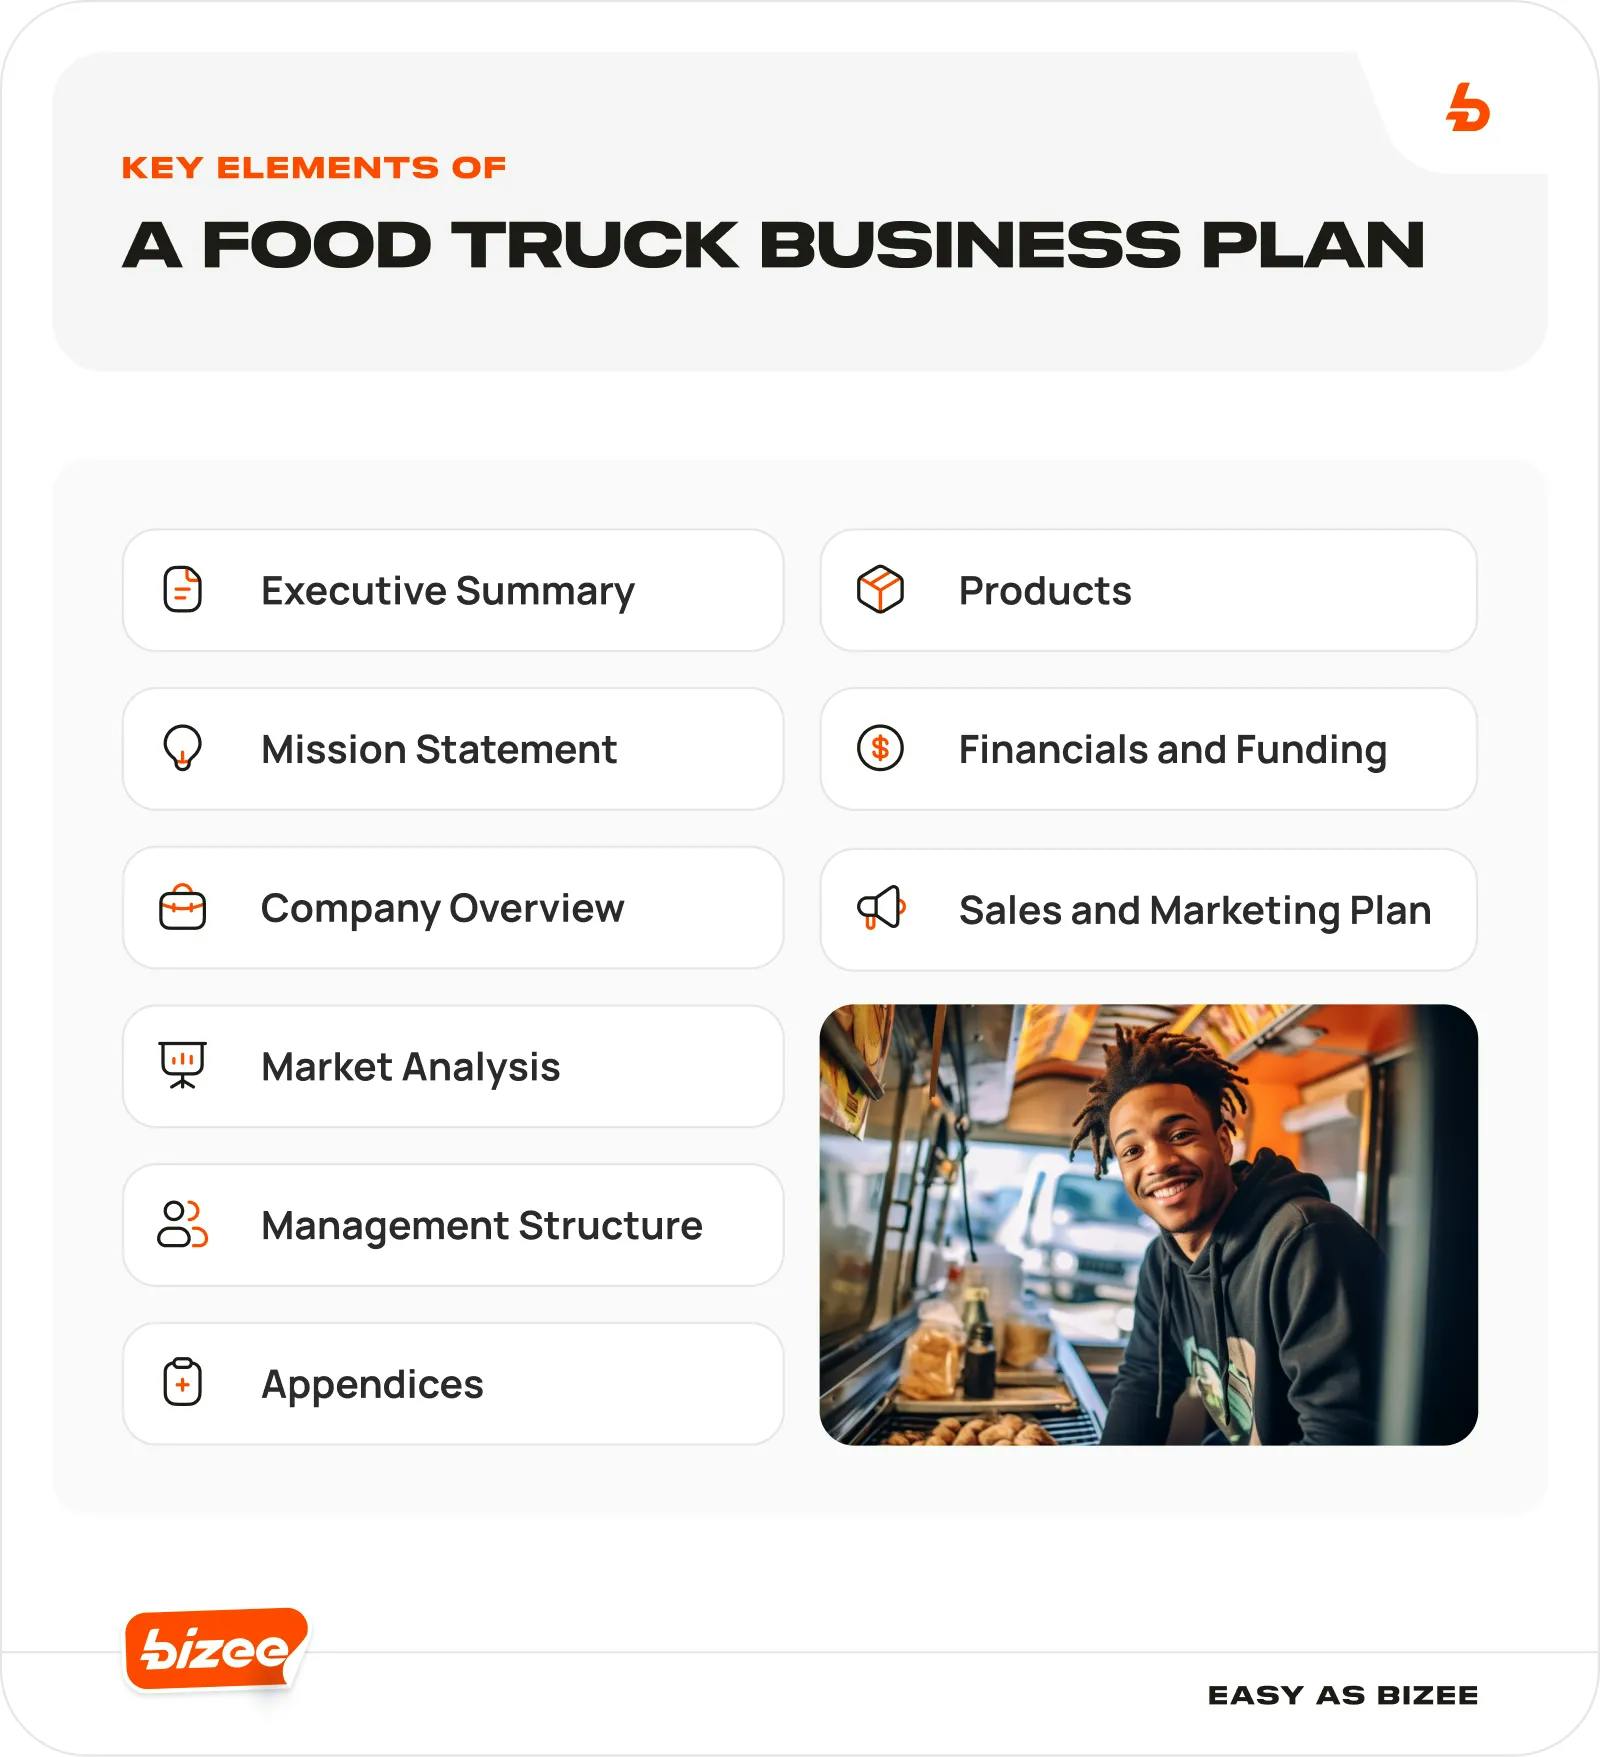 Key Elements of a Food Truck Business Plan